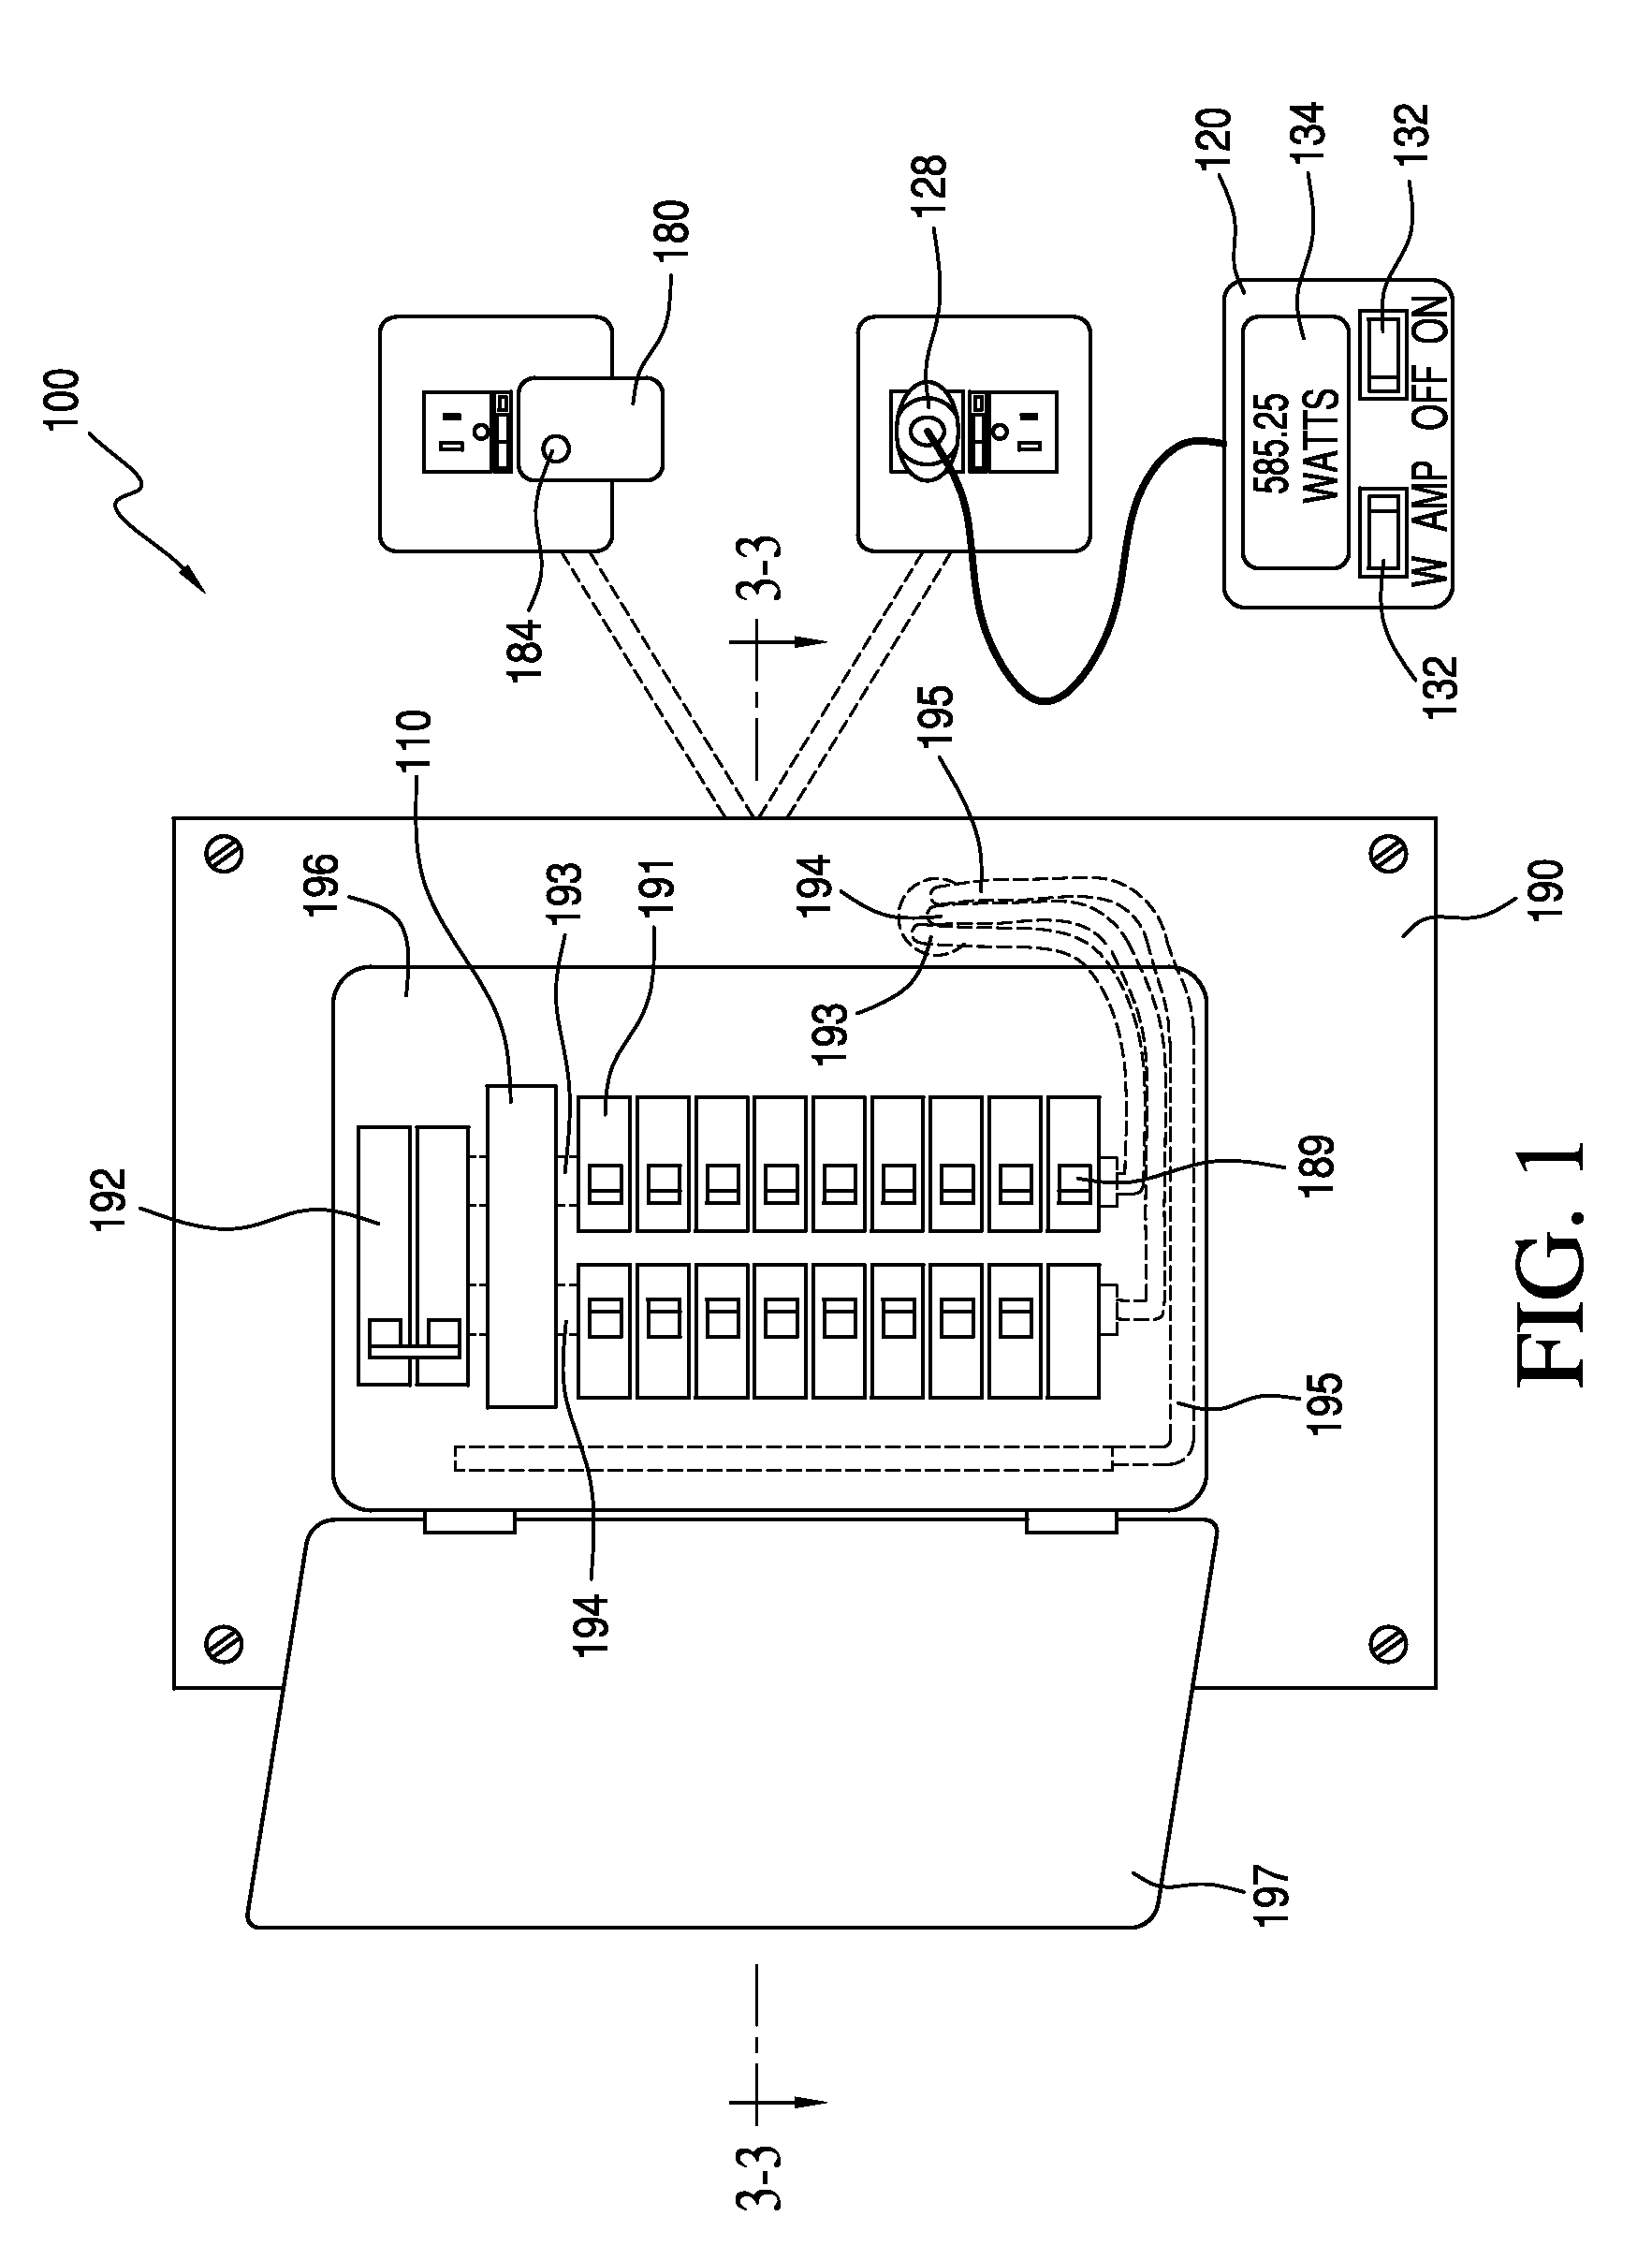 Systems and methods for measuring electrical power usage in a structure and systems and methods of calibrating the same